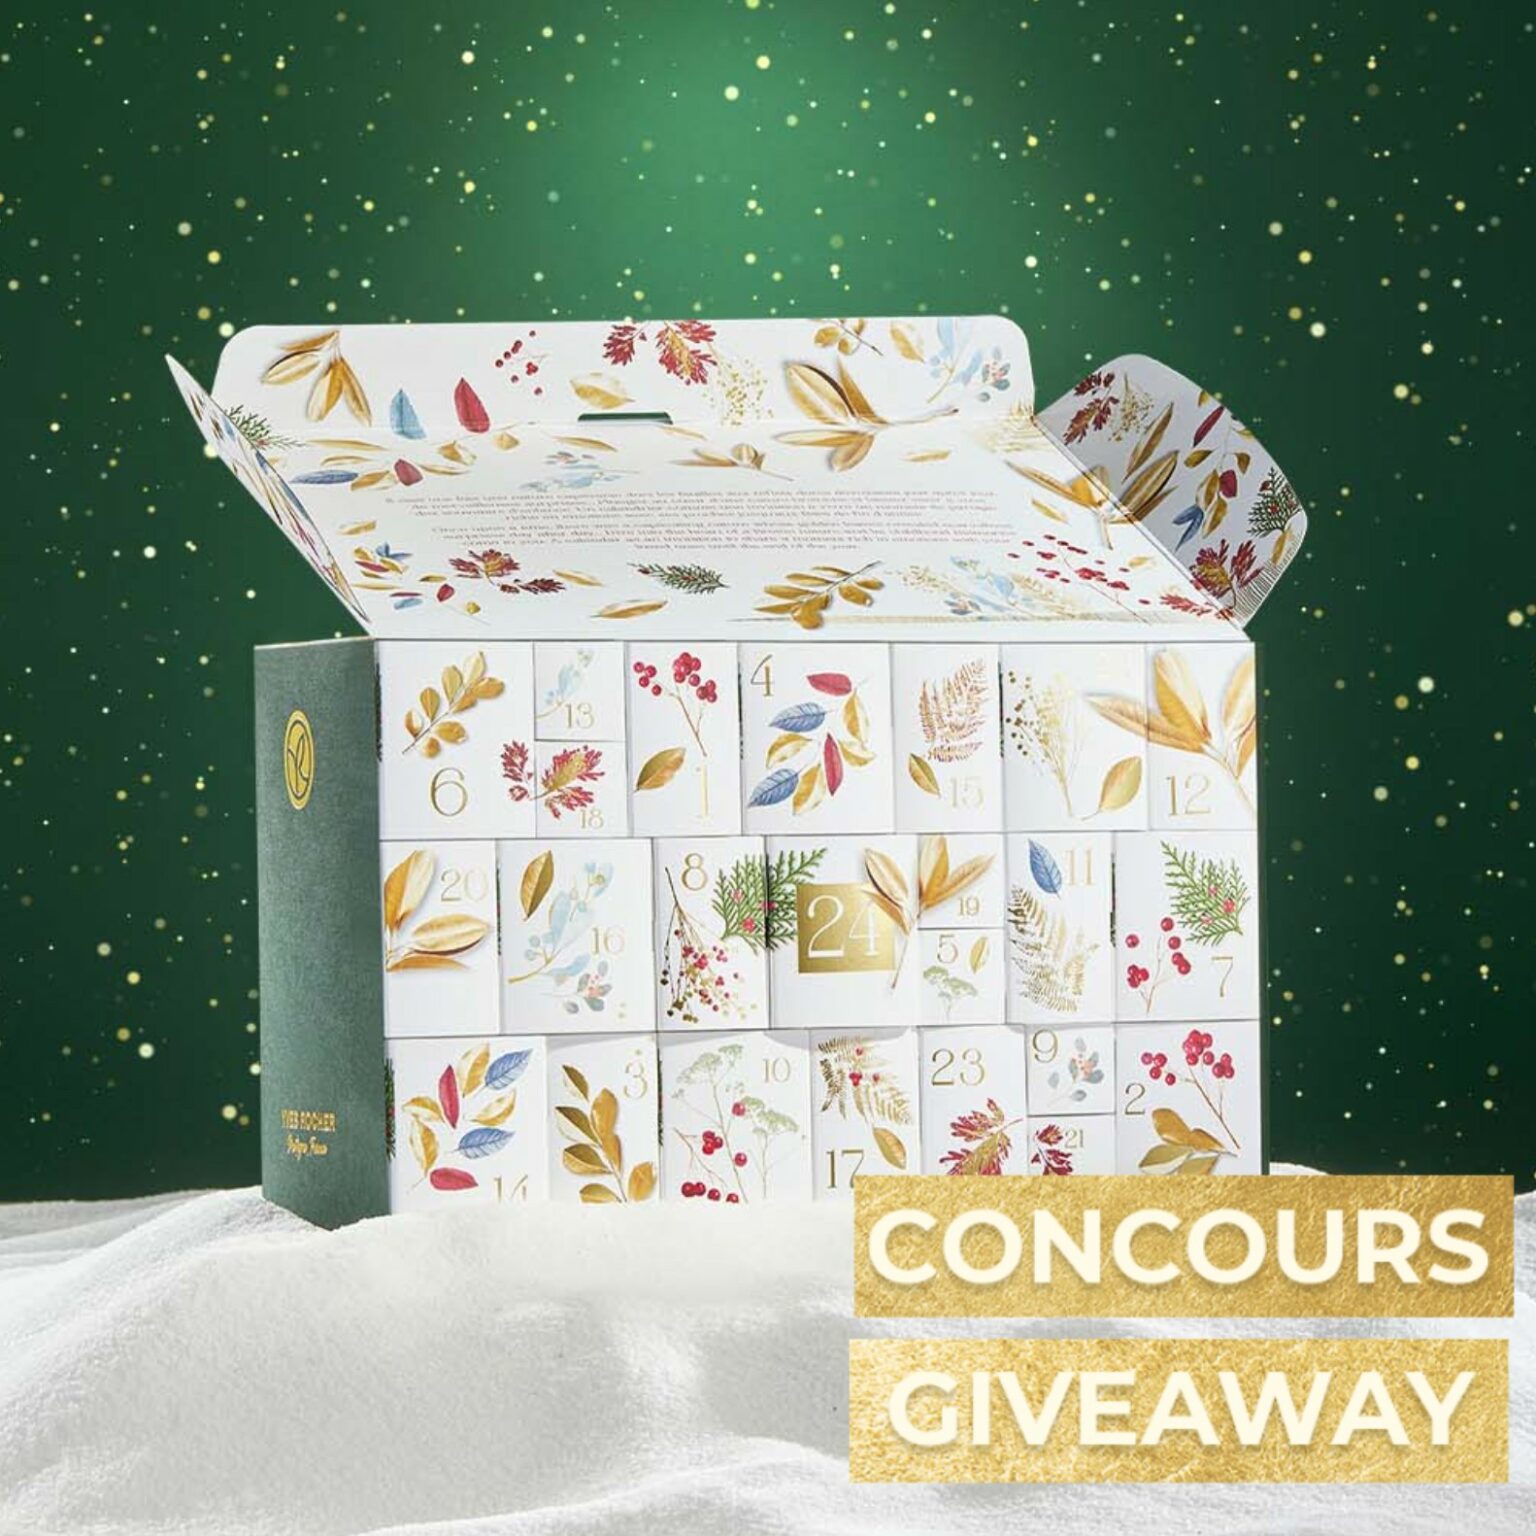 Yves Rocher Contest